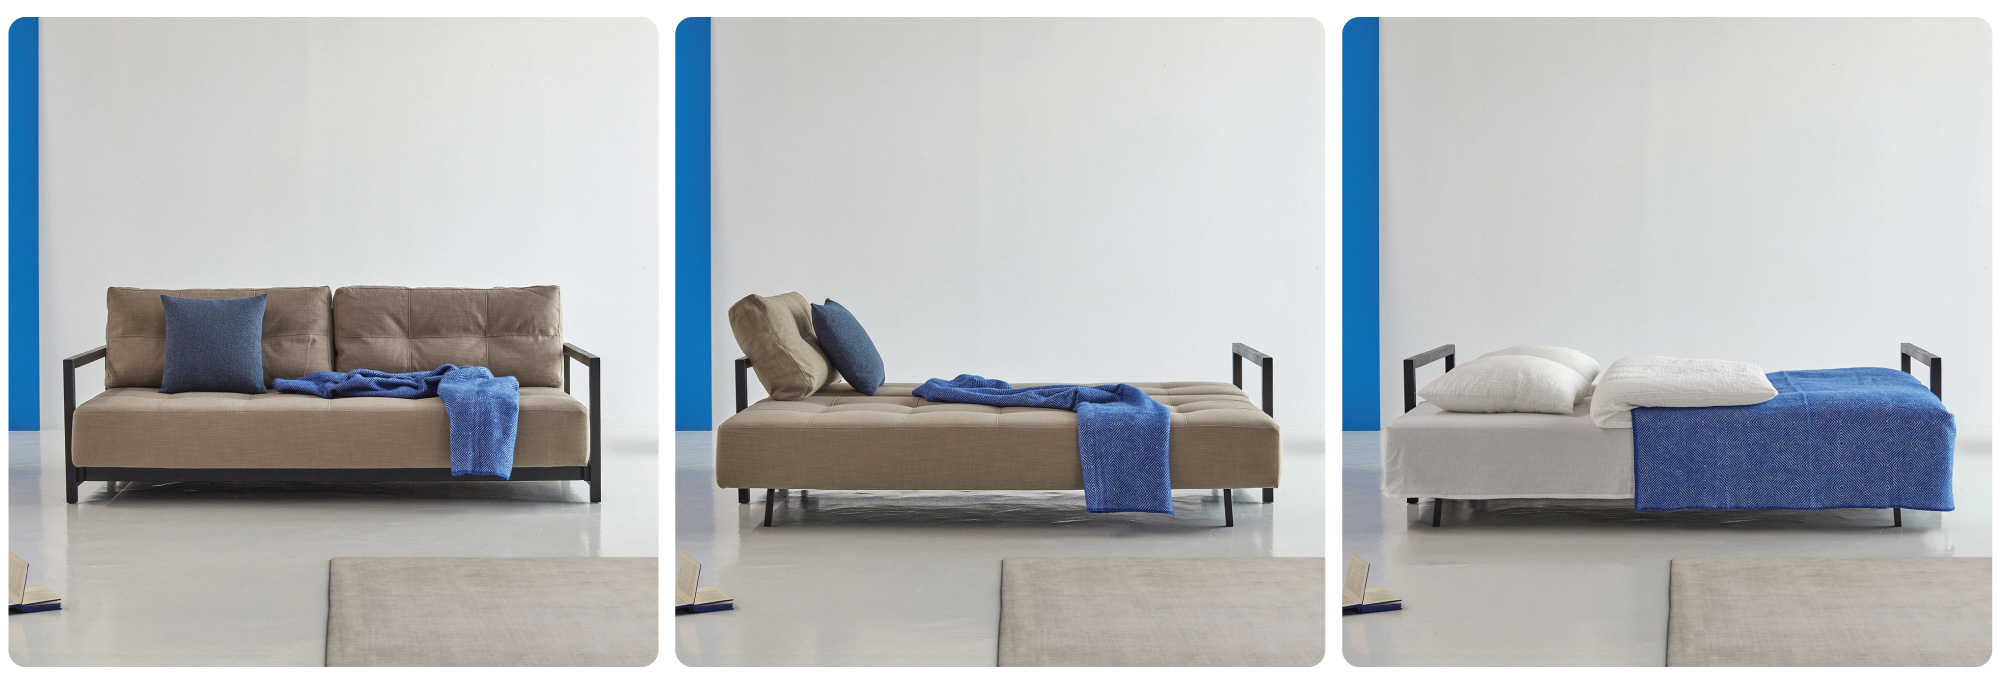 Innovation Bifrost Sofa Bed